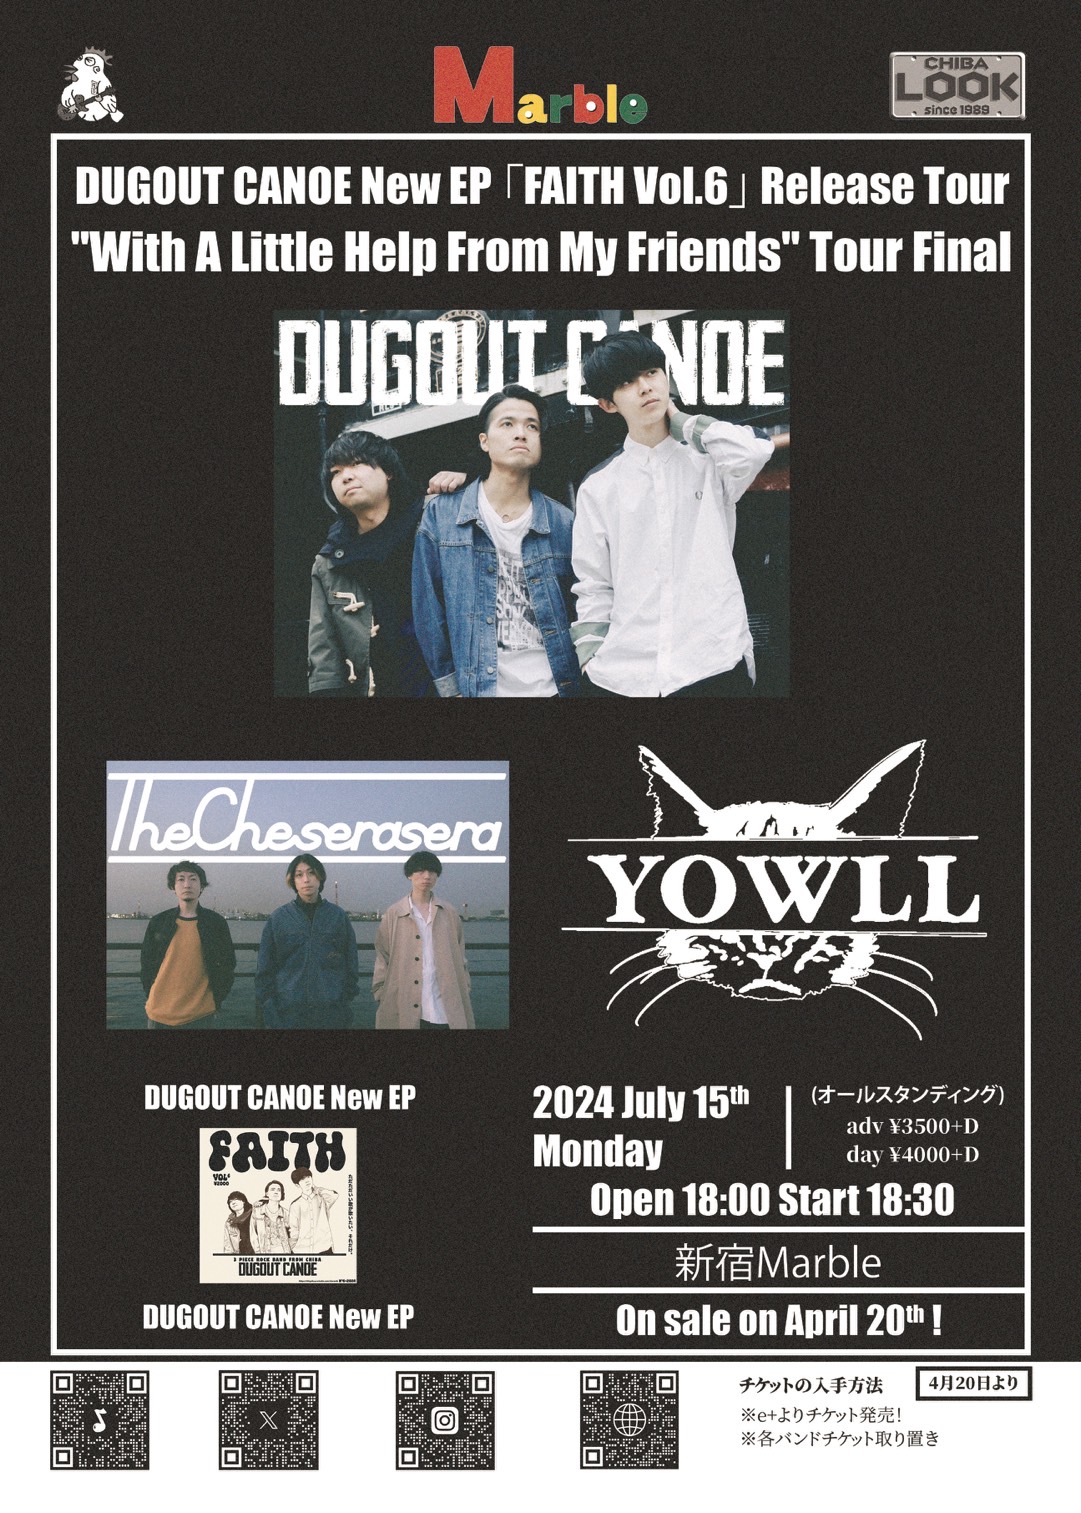 DUGOUT CANOE New EP 「FAITH Vol.6」Release Tour"With A Little Help From My Friends" Tour Final